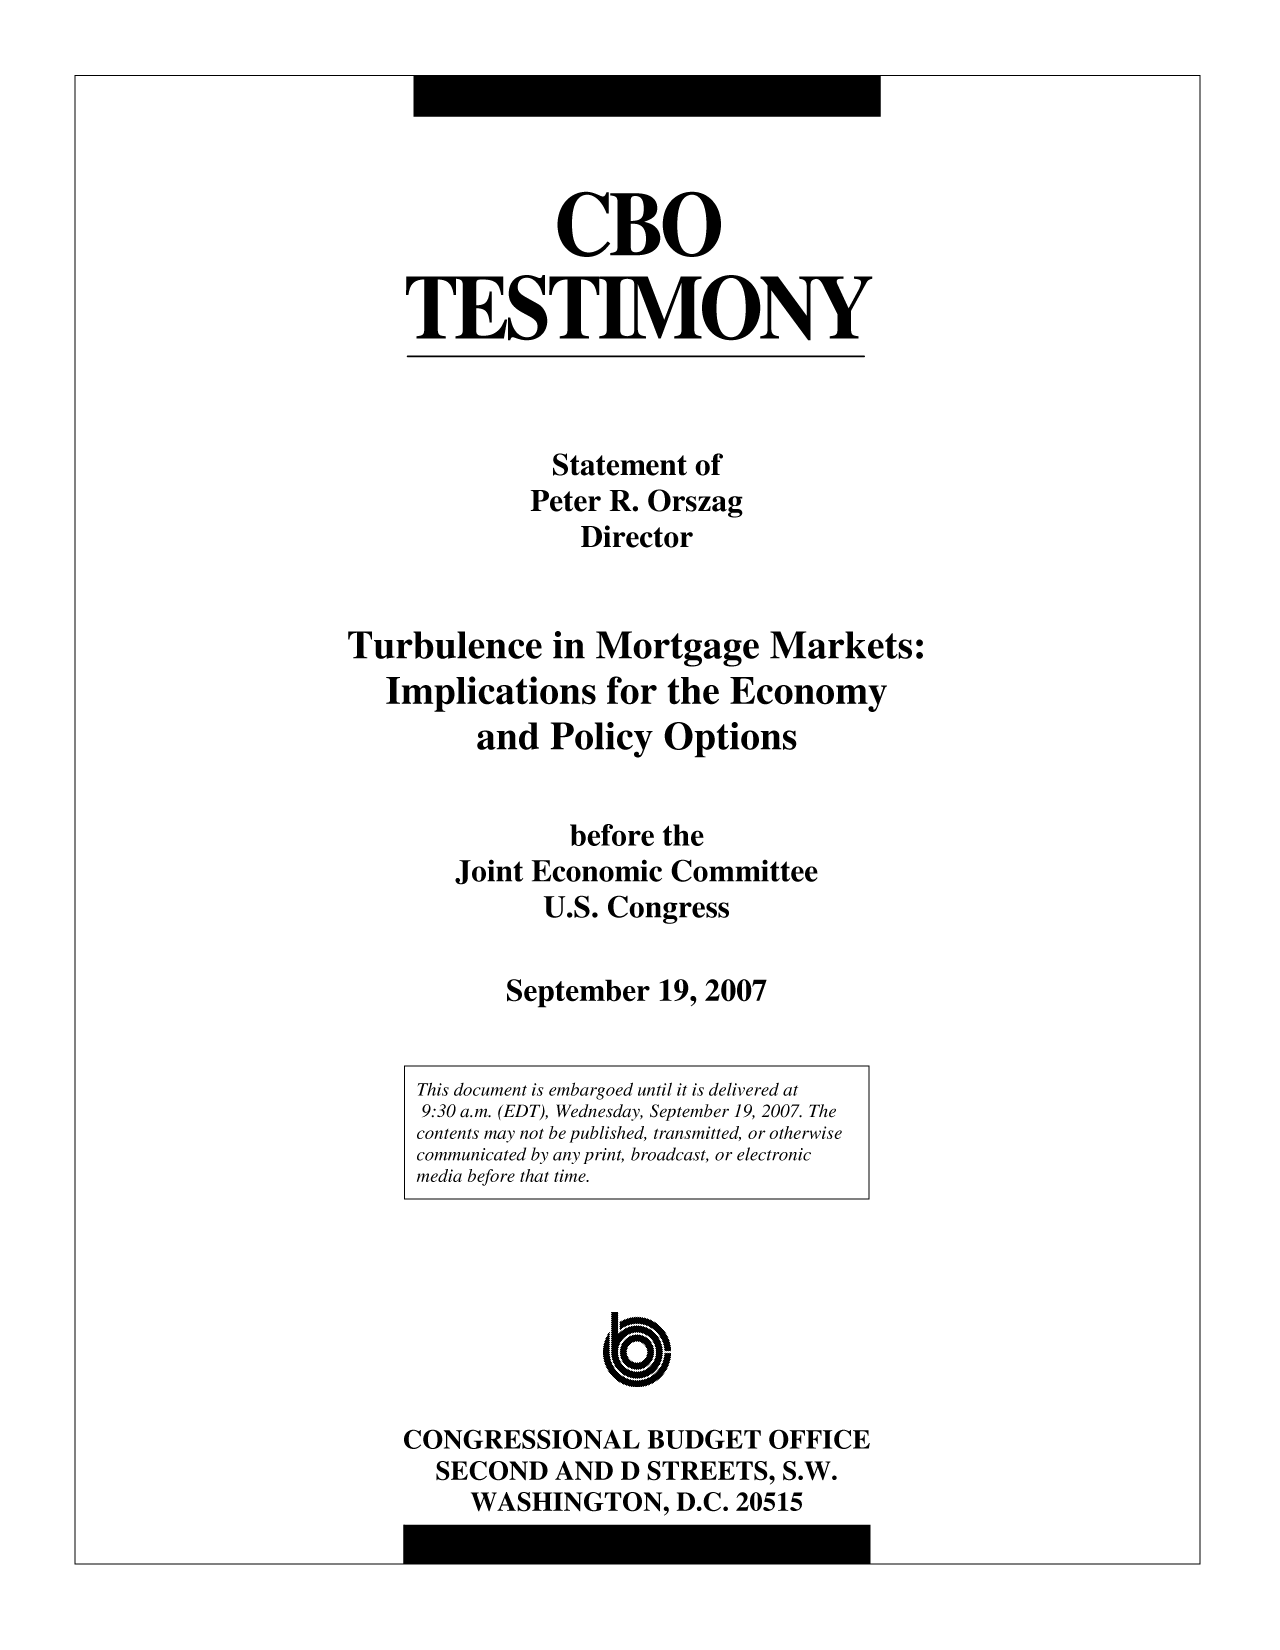 handle is hein.congrec/cbo10069 and id is 1 raw text is: CBO
TESTIMONY

Statement of
Peter R. Orszag
Director

Turbulence in Mortgage Markets:
Implications for the Economy
and Policy Options
before the
Joint Economic Committee
U.S. Congress
September 19, 2007

CONGRESSIONAL BUDGET OFFICE
SECOND AND D STREETS, S.W.
WASHINGTON, D.C. 20515

This document is embargoed until it is delivered at
9:30 a.m. (EDT), Wednesday, September 19, 2007. The
contents may not be published, transmitted, or otherwise
communicated by any print, broadcast, or electronic
media before that time.


